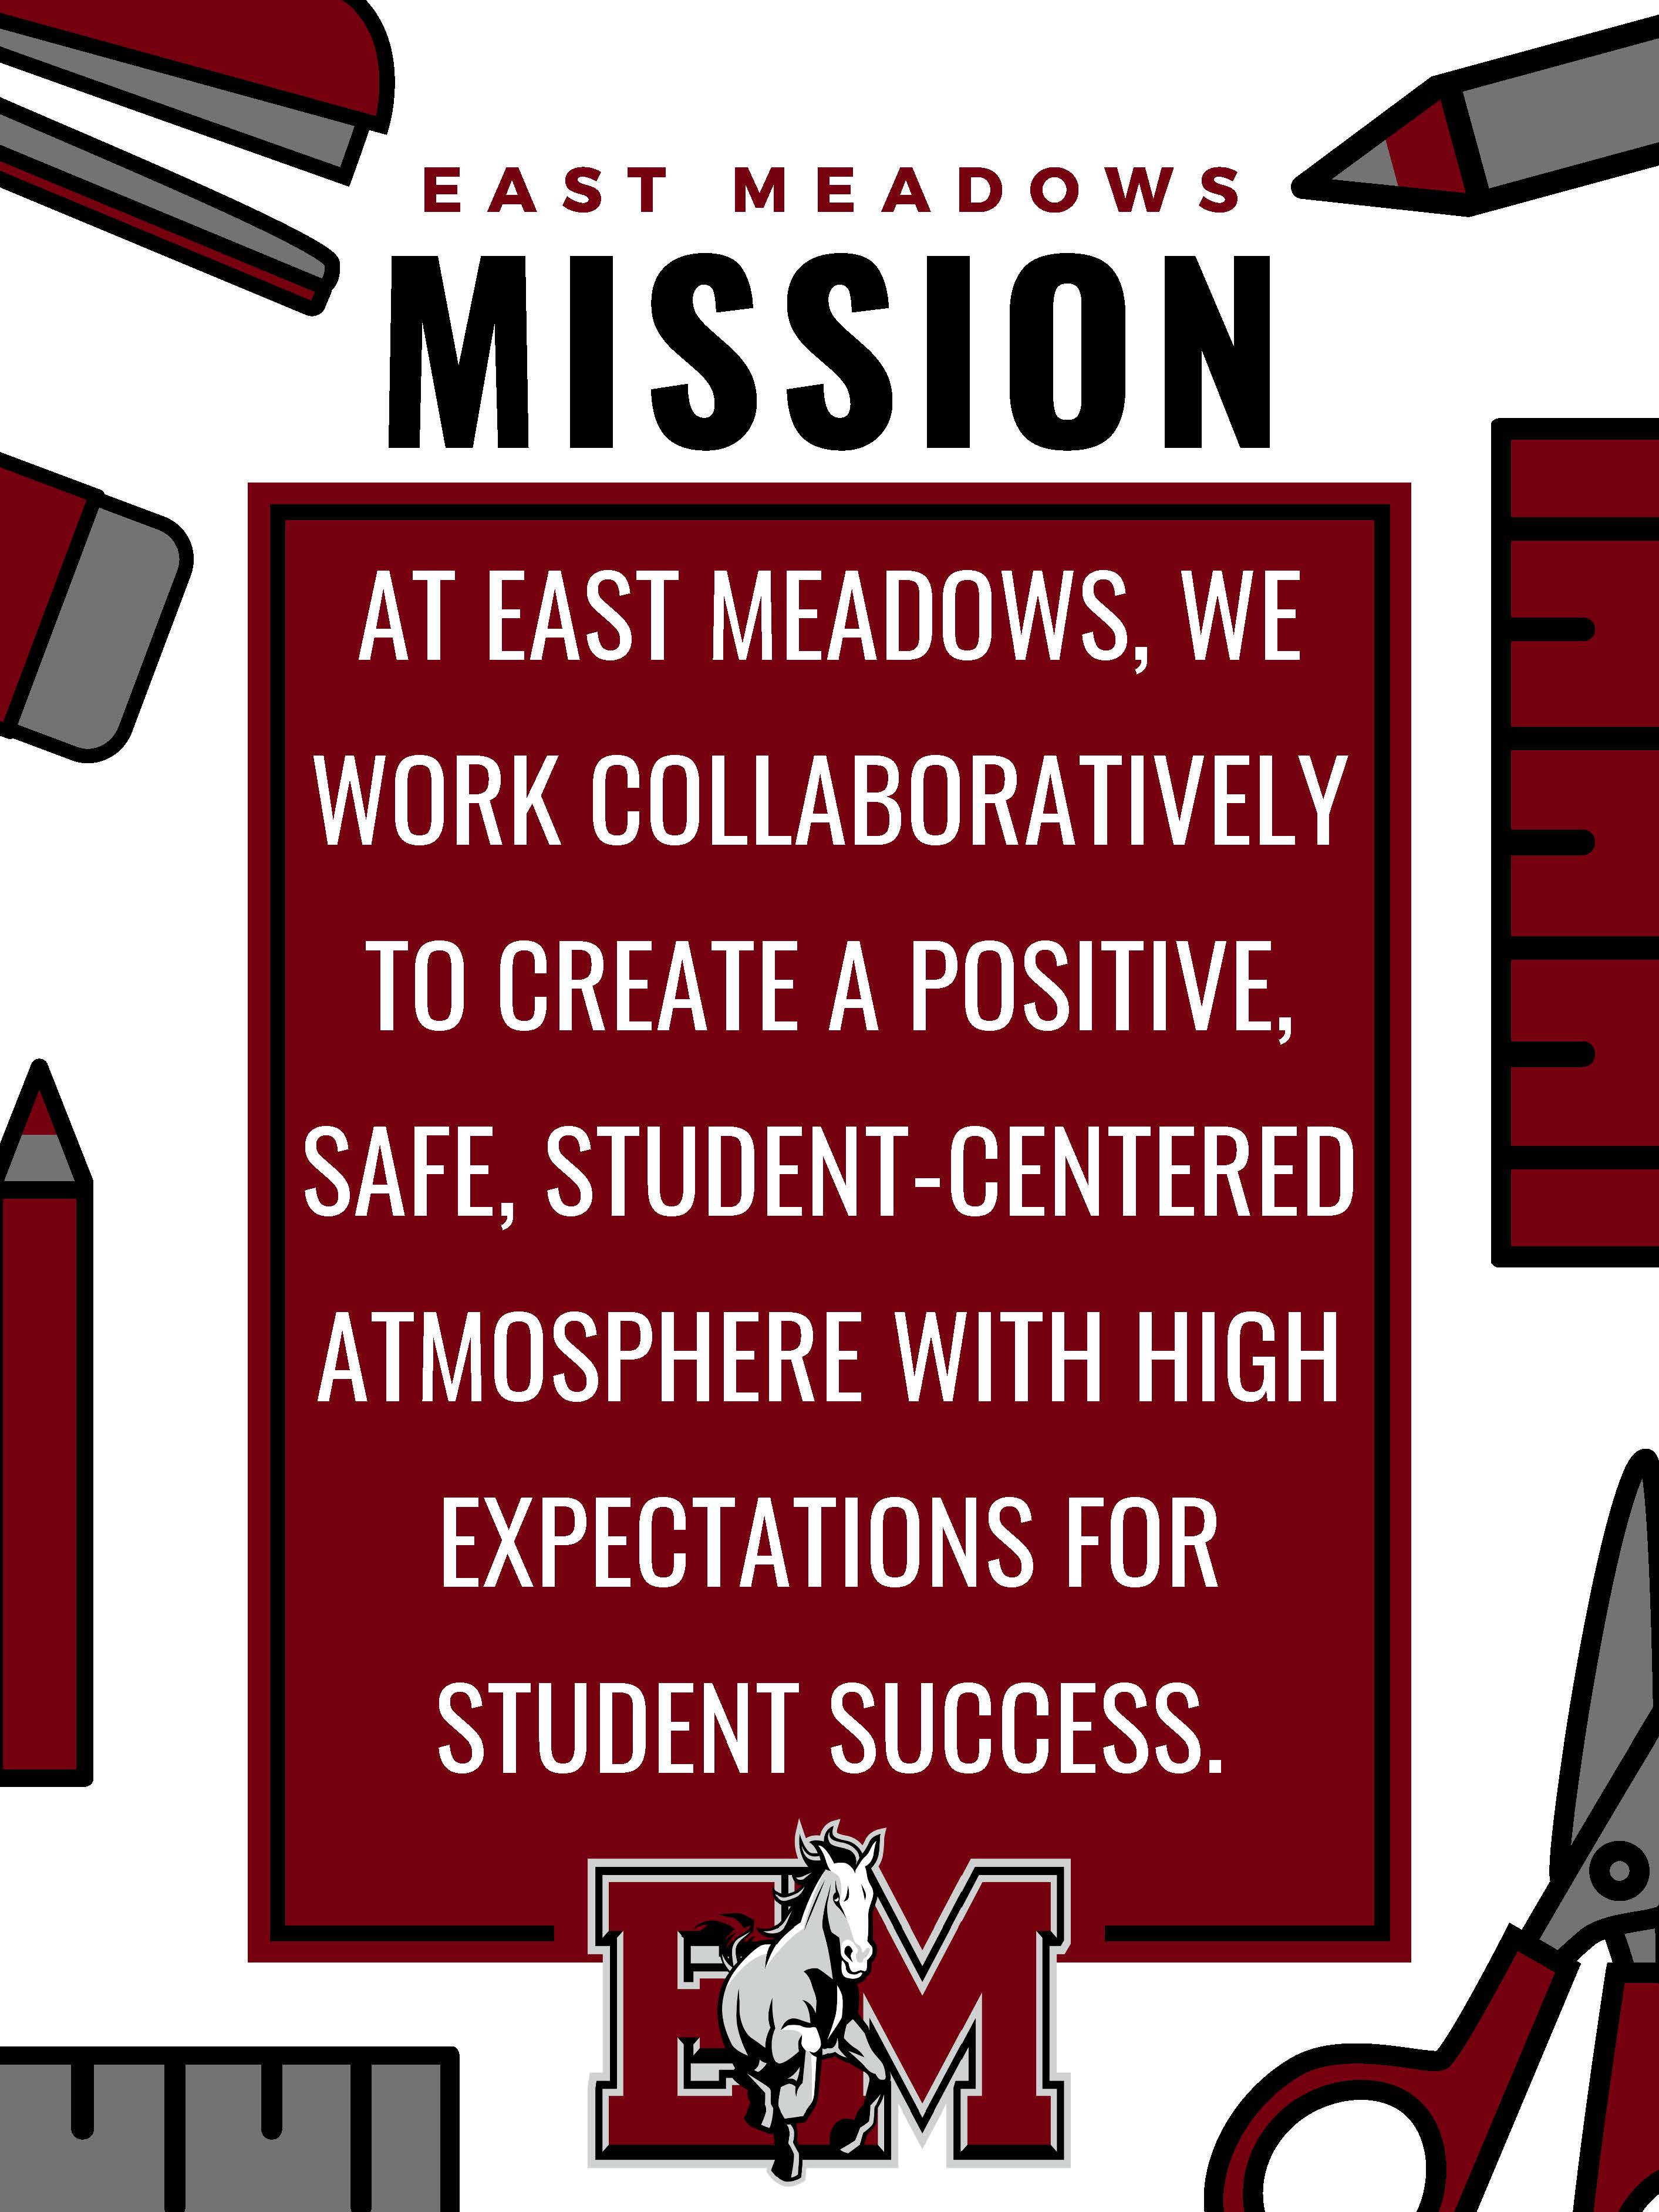 Vision Statement:  At East Meadows we work collaboratively to create a positive, safe, student centered environment with high expectations for student success